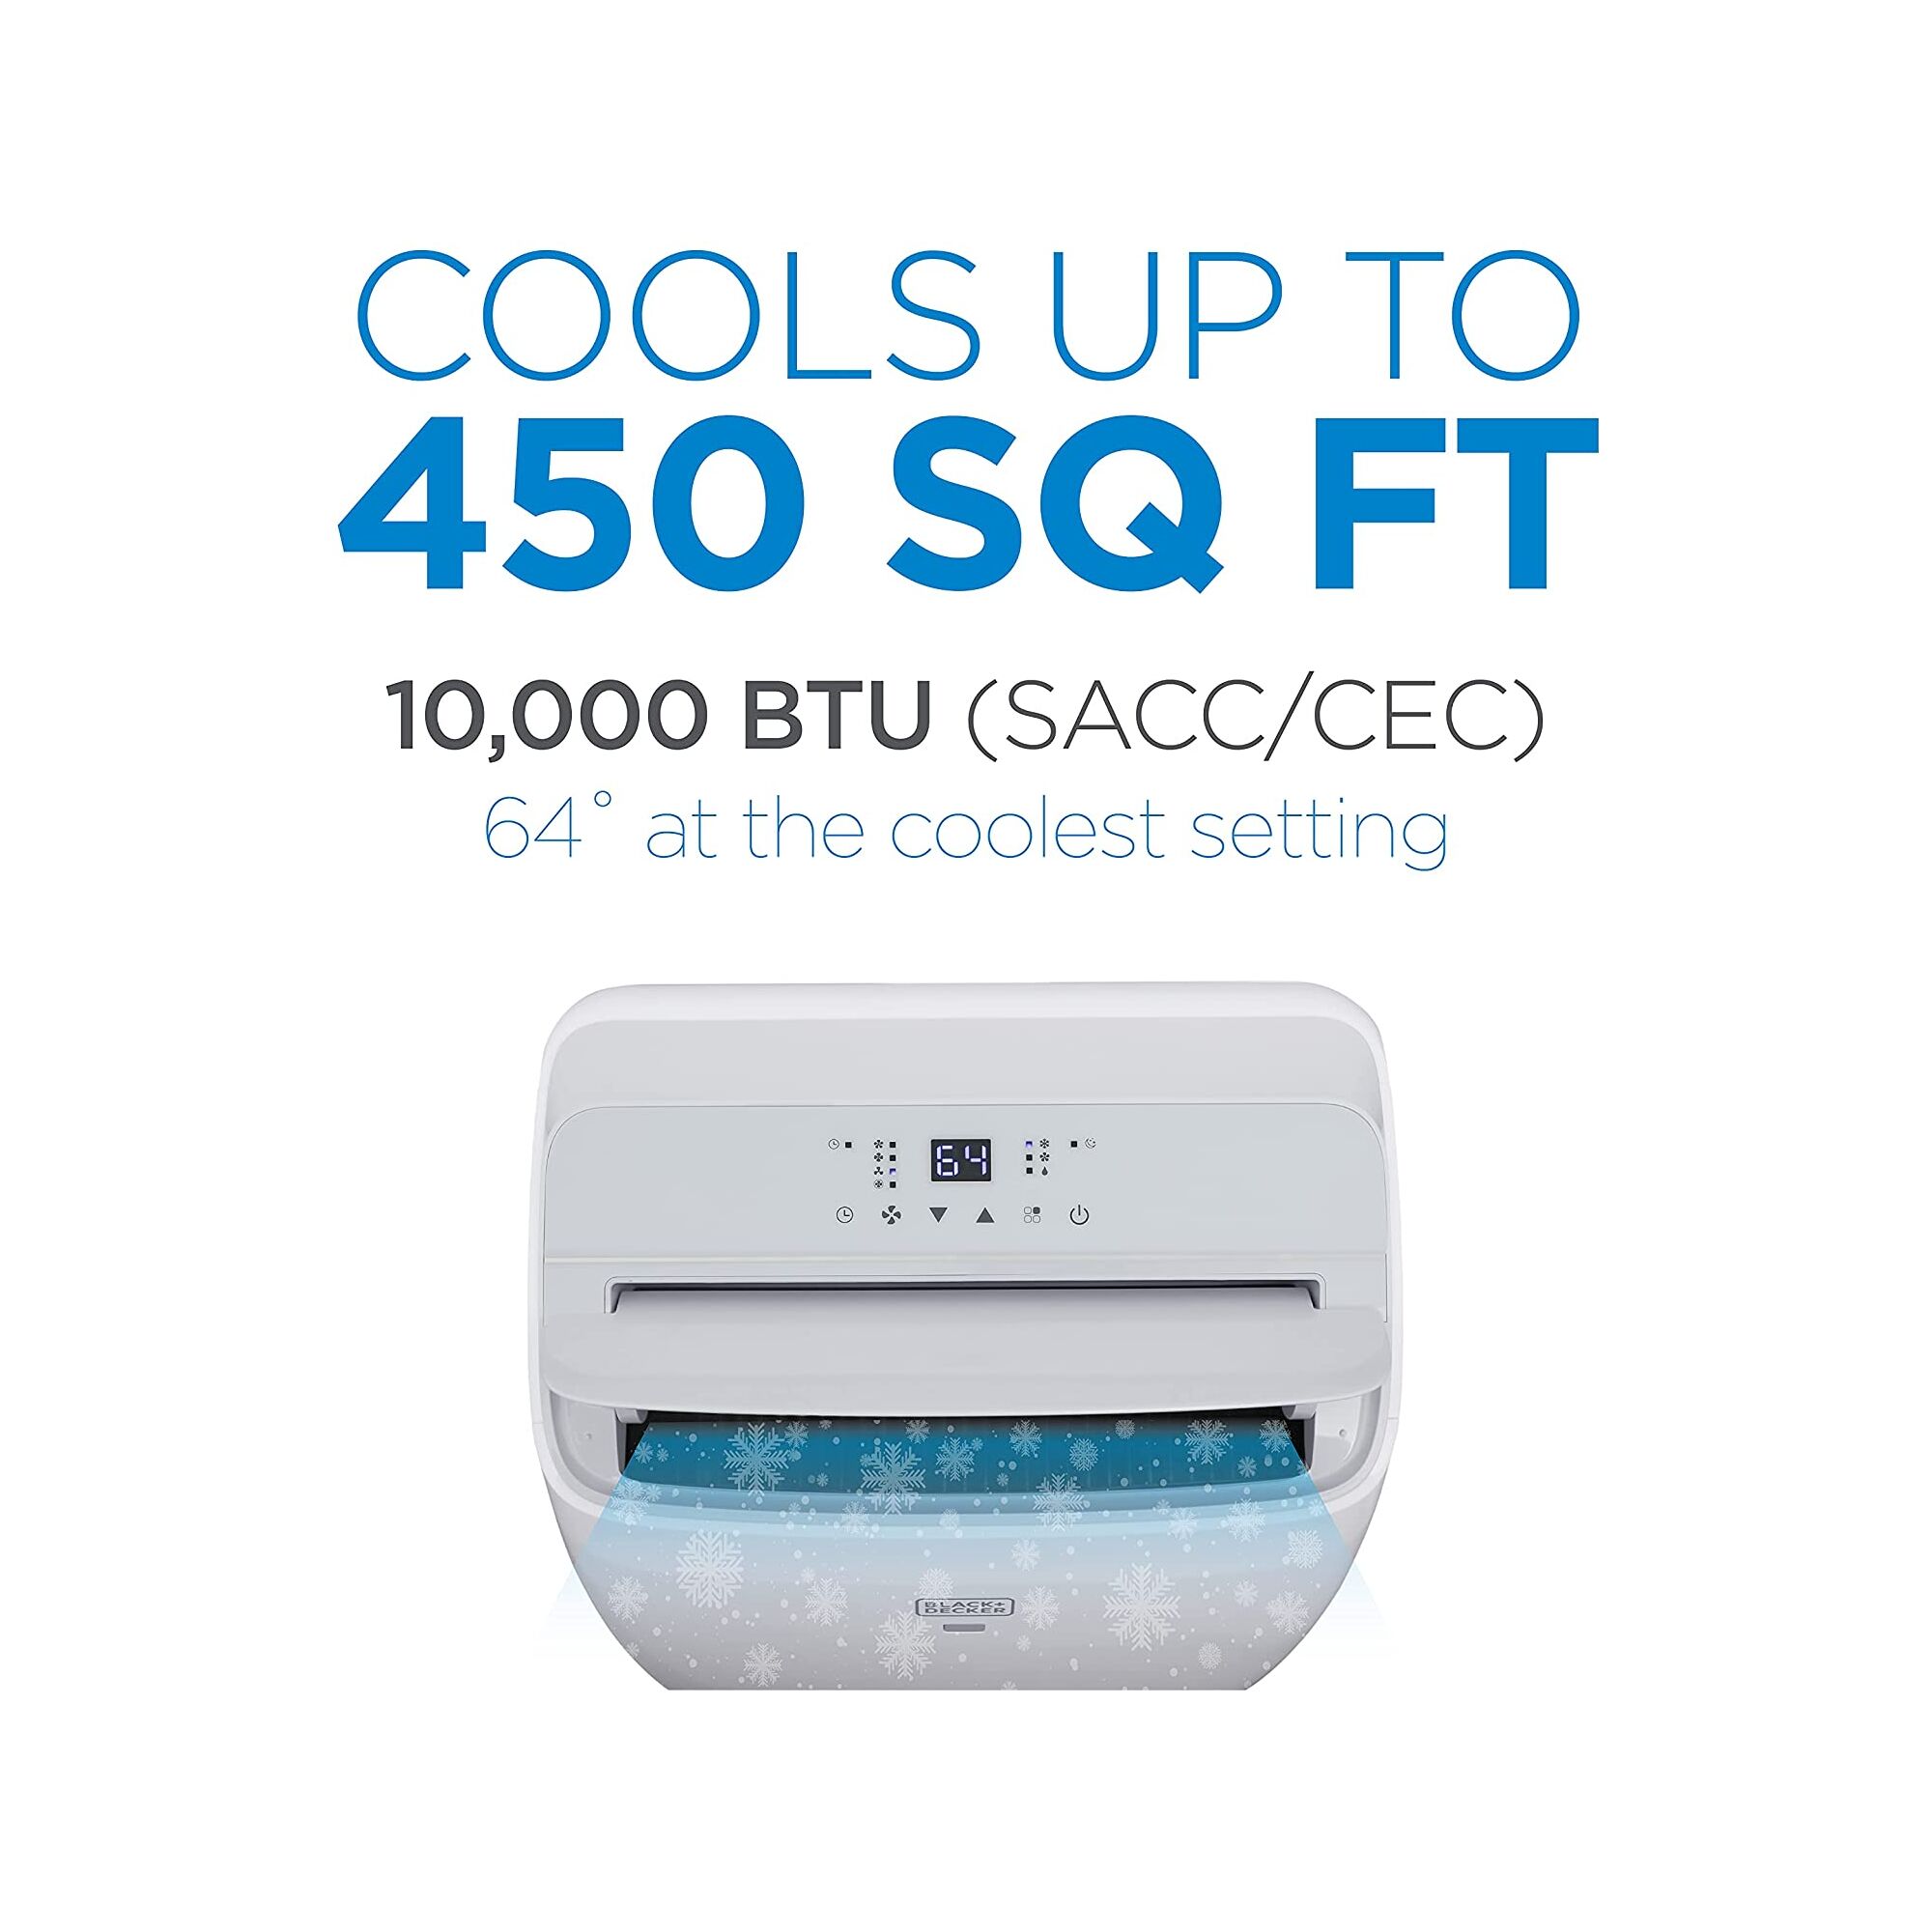 Graphic calling out that the air condition cools up to 450 square feet